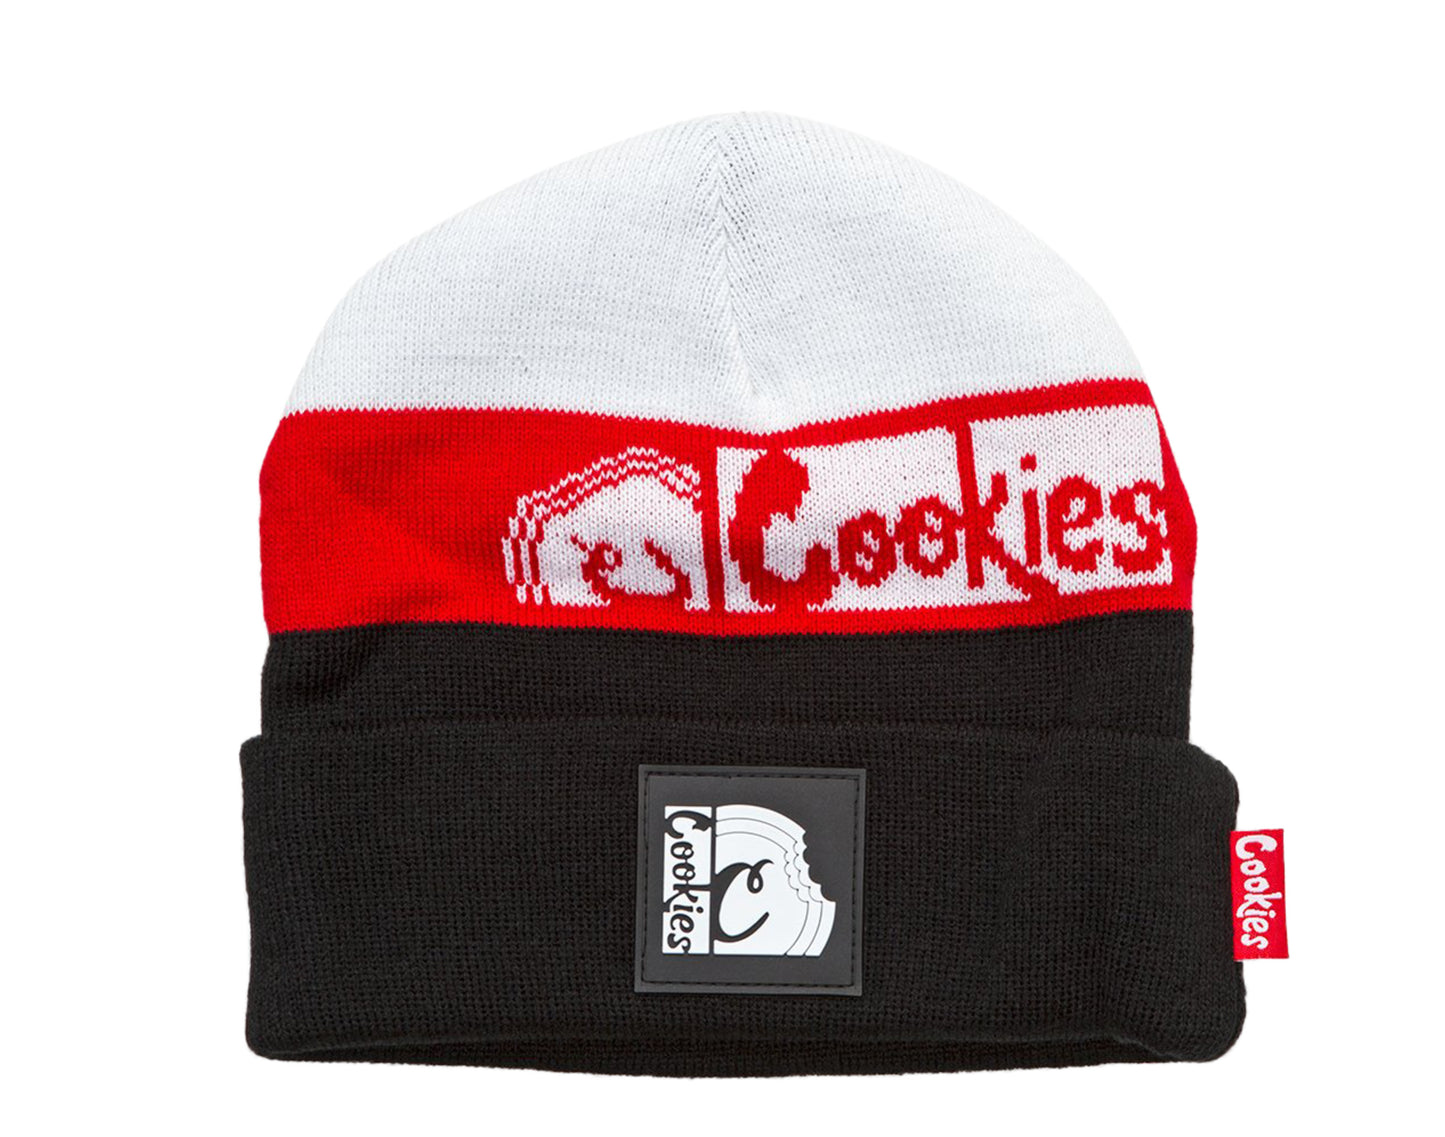 Cookies Glaciers Of Ice Logo Patch White/Black Knit Beanie Hat 1546X4337-WHB